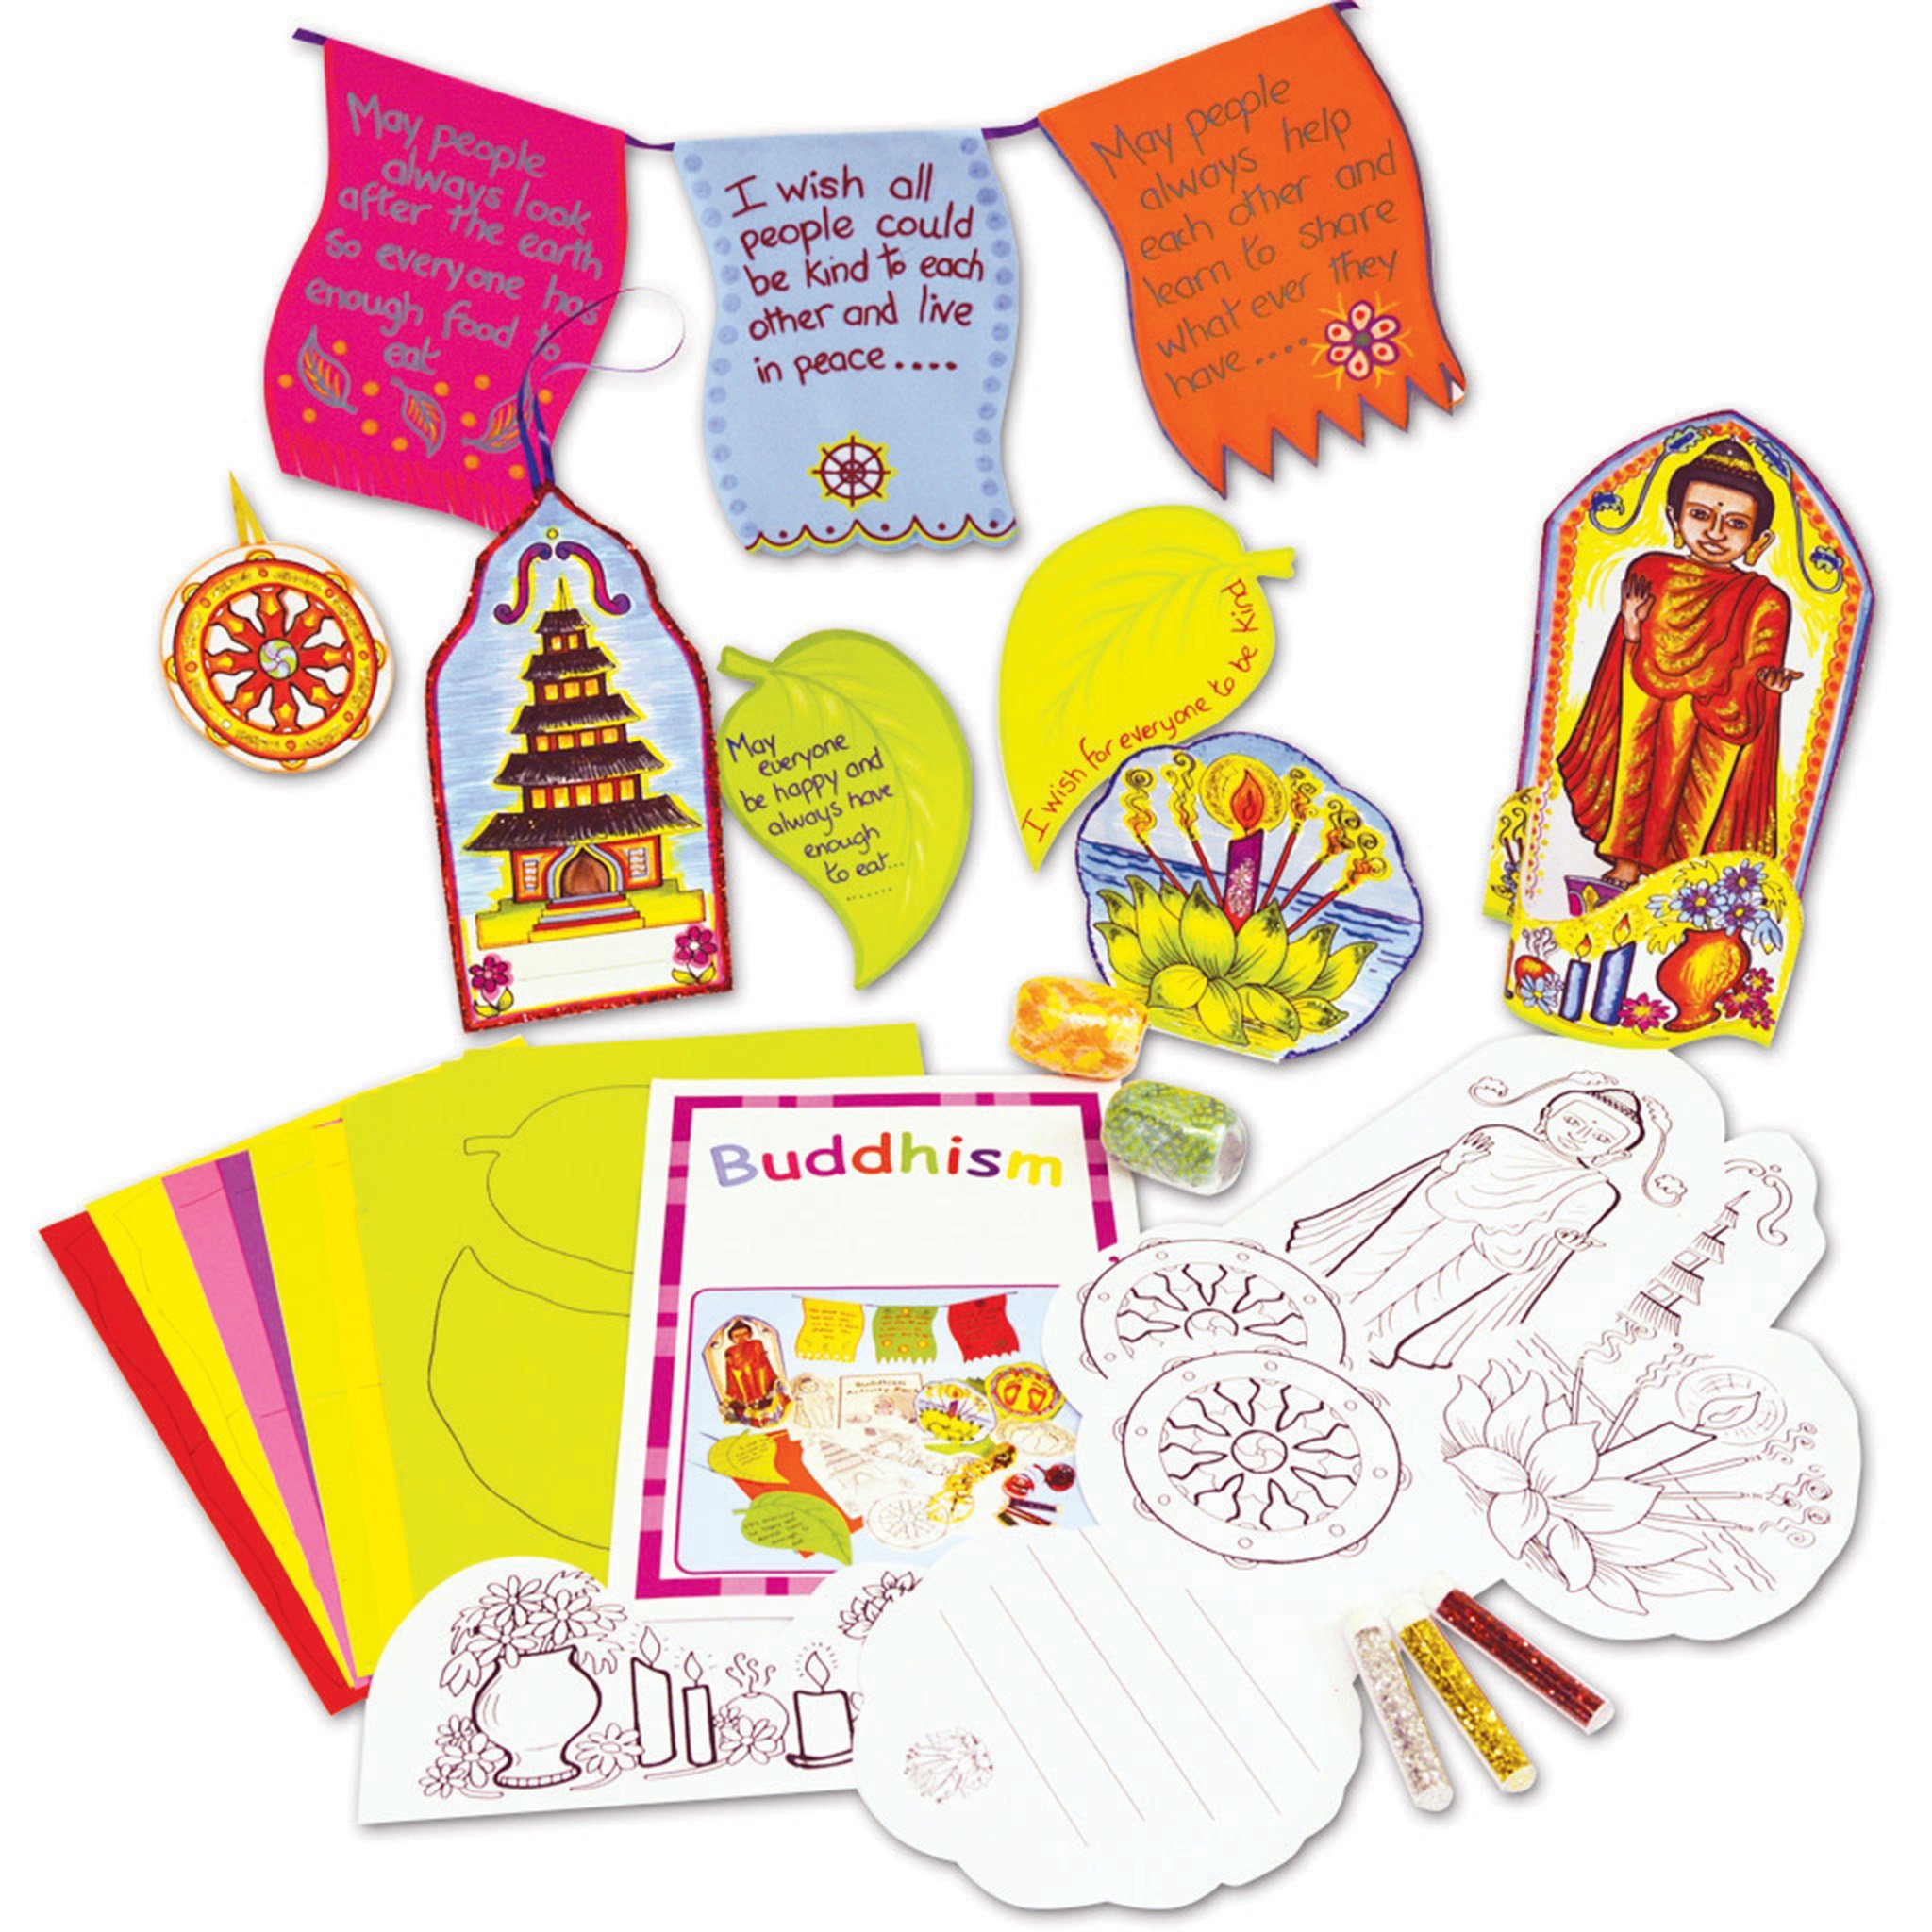 Buddhism Craft Activity and Learning Resource Pack KS1 KS2